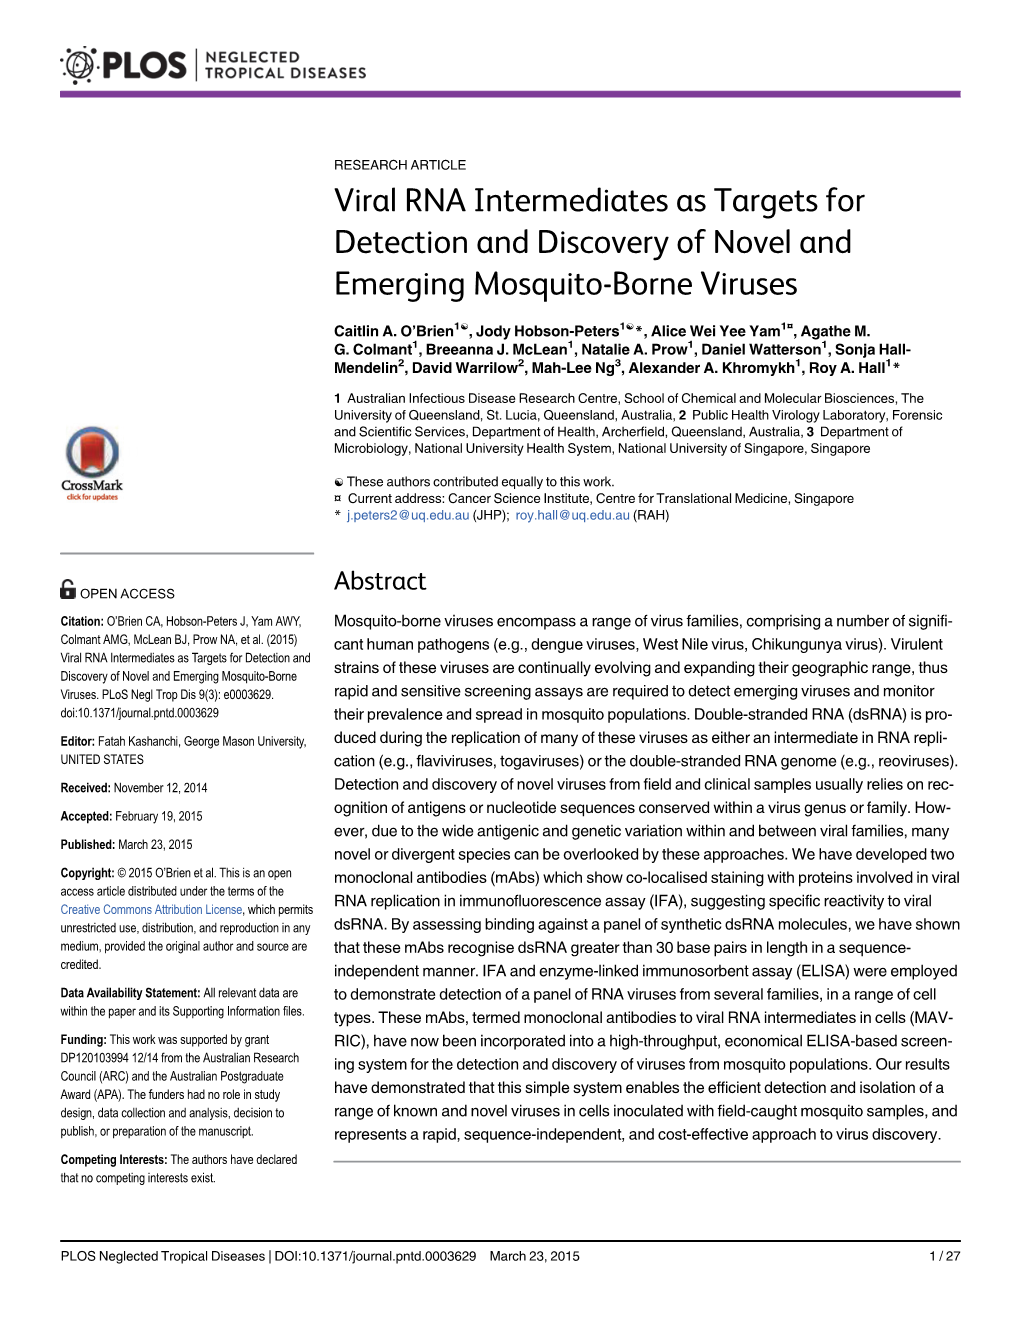 Viral RNA Intermediates As Targets for Detection and Discovery of Novel and Emerging Mosquito-Borne Viruses